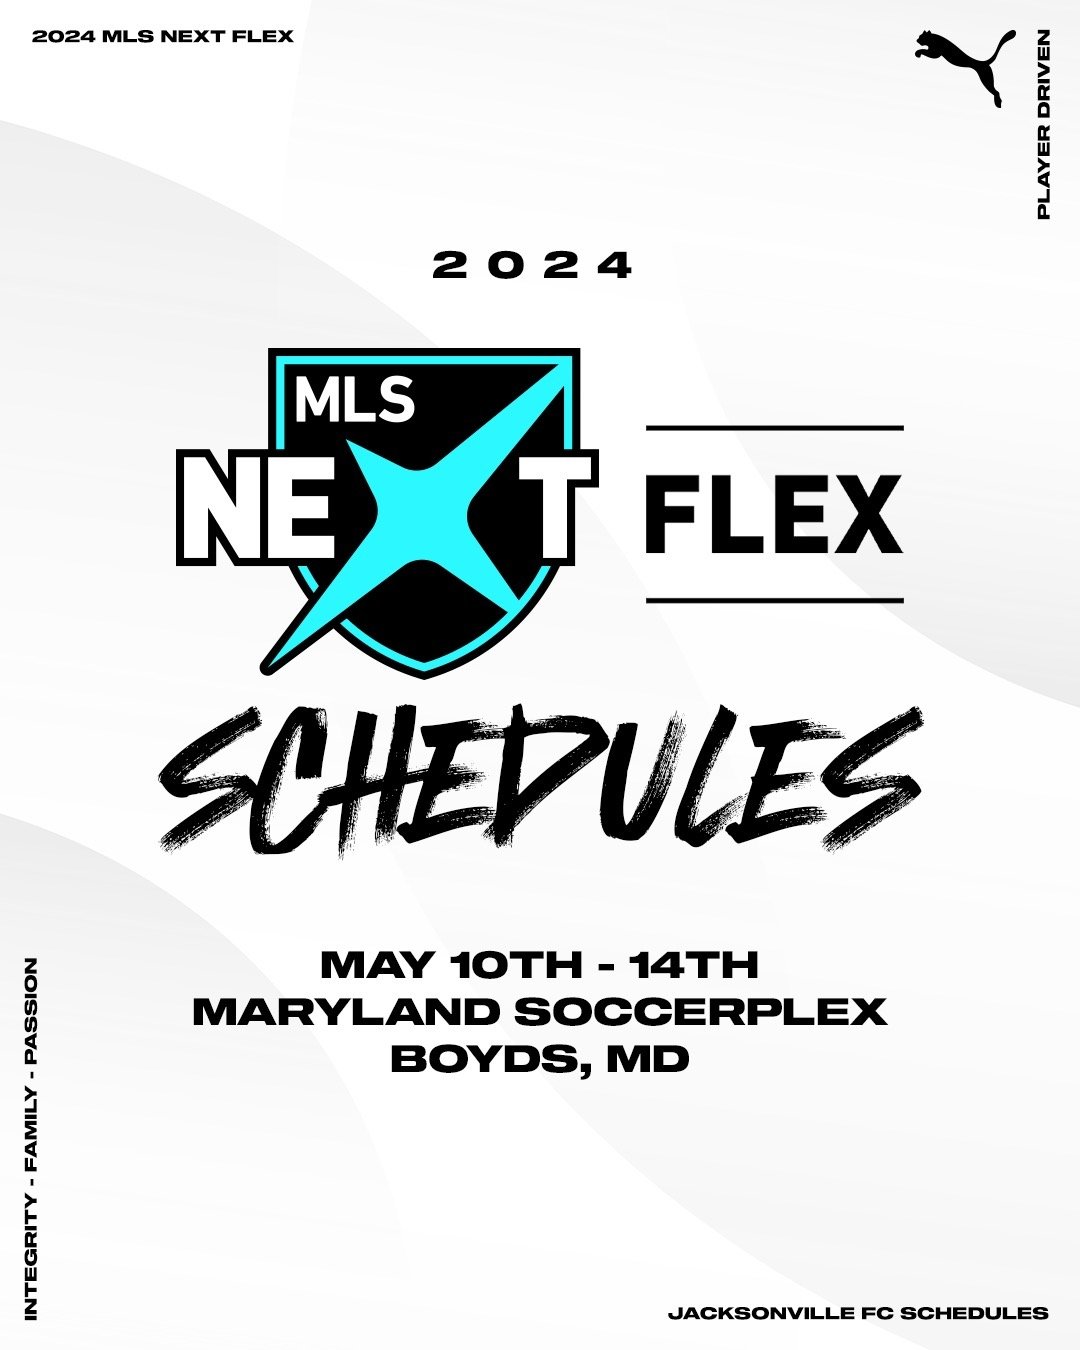 Good luck to our MLS NEXT U19 JFC Boys up in Maryland this weekend. They kicked off the 2024 MLS NEXT Flex against FC Dallas today.

Let's Go JFC!!!

#PlayerDriven #904JFC